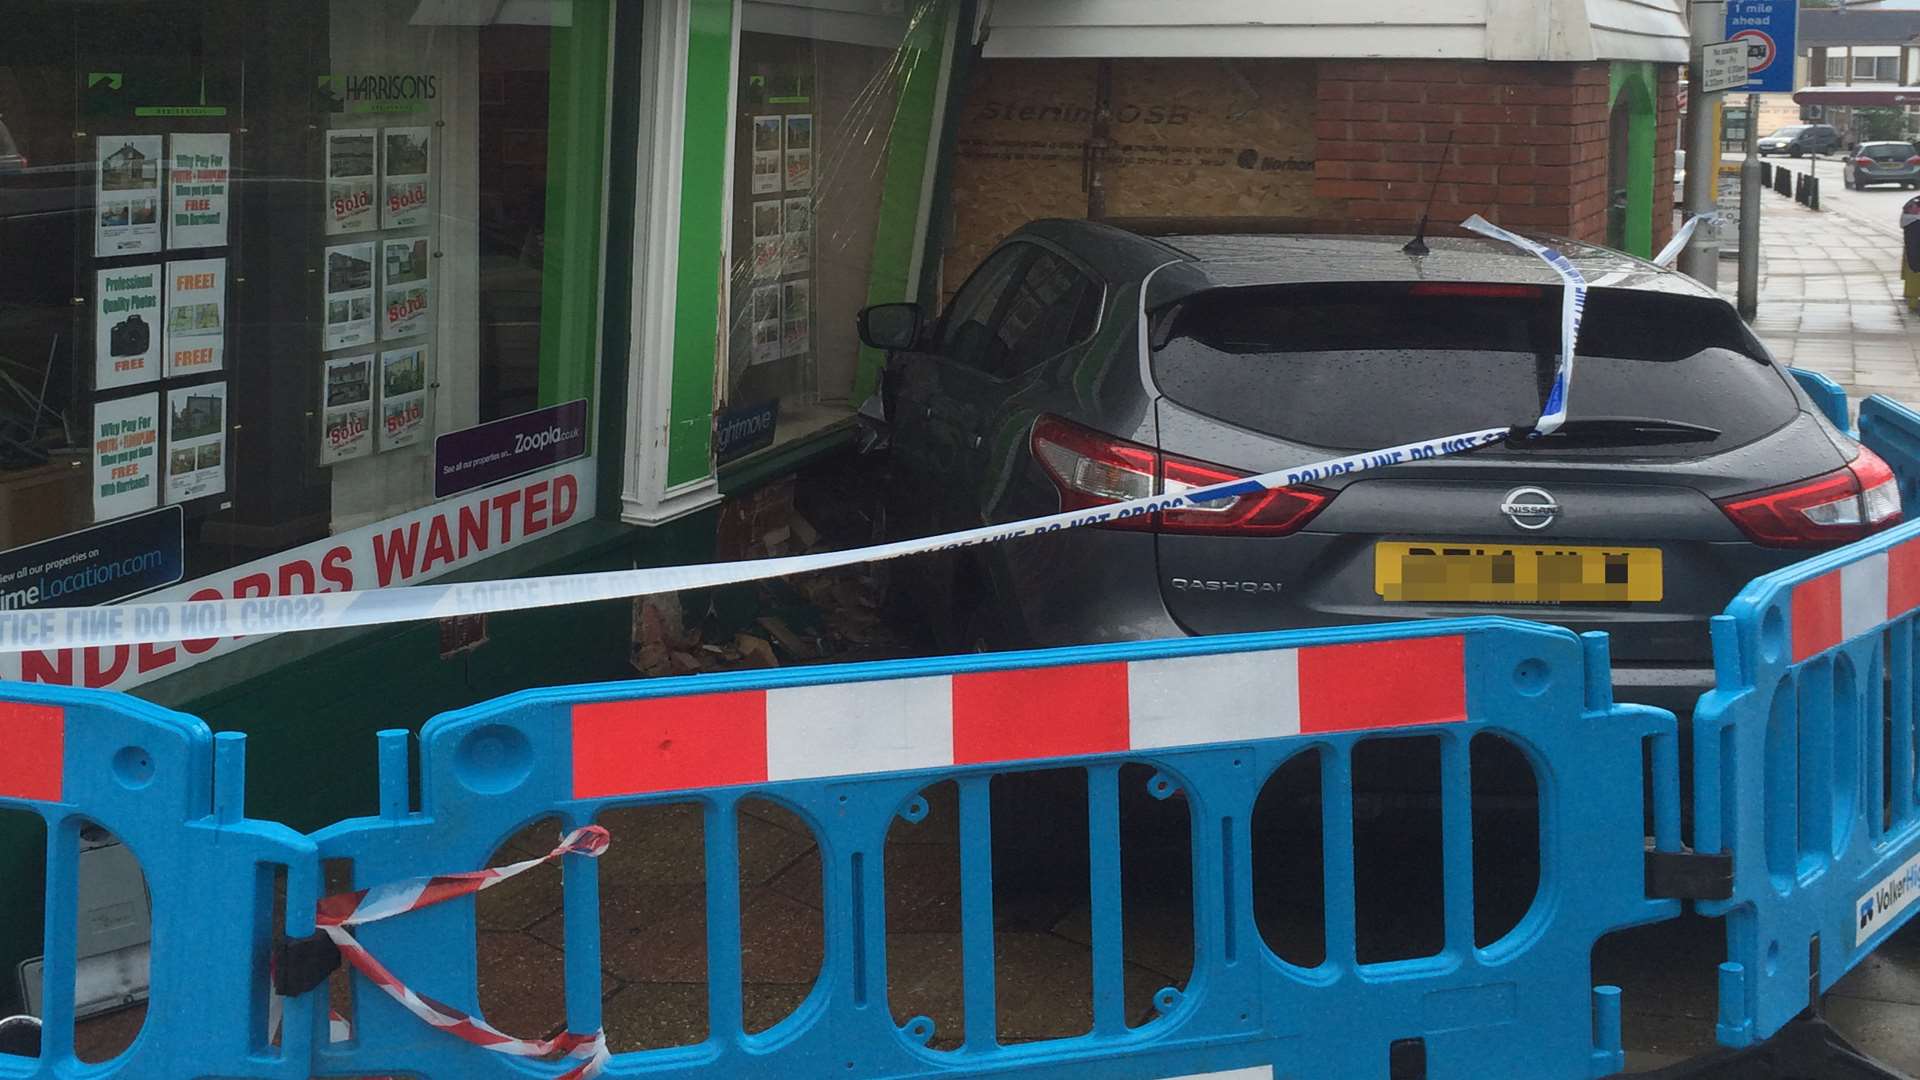 The car crashed into the shop front